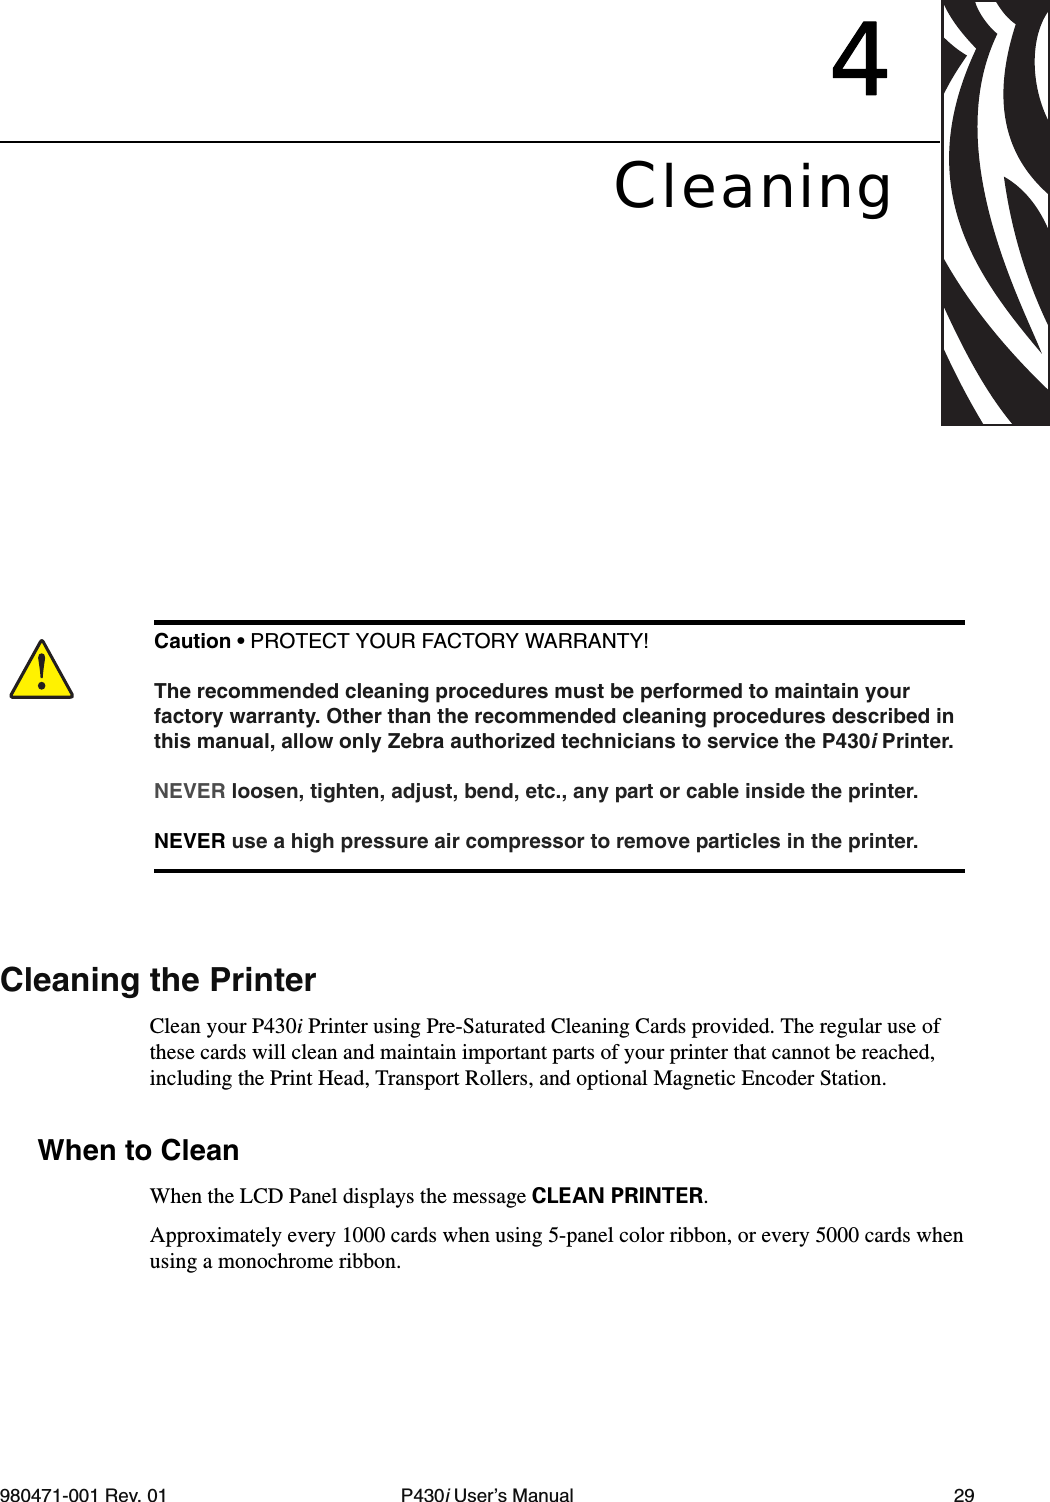 980471-001 Rev. 01 P430i User’s Manual 294CleaningCleaning the PrinterClean your P430i Printer using Pre-Saturated Cleaning Cards provided. The regular use of these cards will clean and maintain important parts of your printer that cannot be reached, including the Print Head, Transport Rollers, and optional Magnetic Encoder Station.When to CleanWhen the LCD Panel displays the message CLEAN PRINTER.Approximately every 1000 cards when using 5-panel color ribbon, or every 5000 cards when using a monochrome ribbon.Caution • PROTECT YOUR FACTORY WARRANTY!The recommended cleaning procedures must be performed to maintain your factory warranty. Other than the recommended cleaning procedures described in this manual, allow only Zebra authorized technicians to service the P430i Printer.NEVER loosen, tighten, adjust, bend, etc., any part or cable inside the printer.NEVER use a high pressure air compressor to remove particles in the printer.